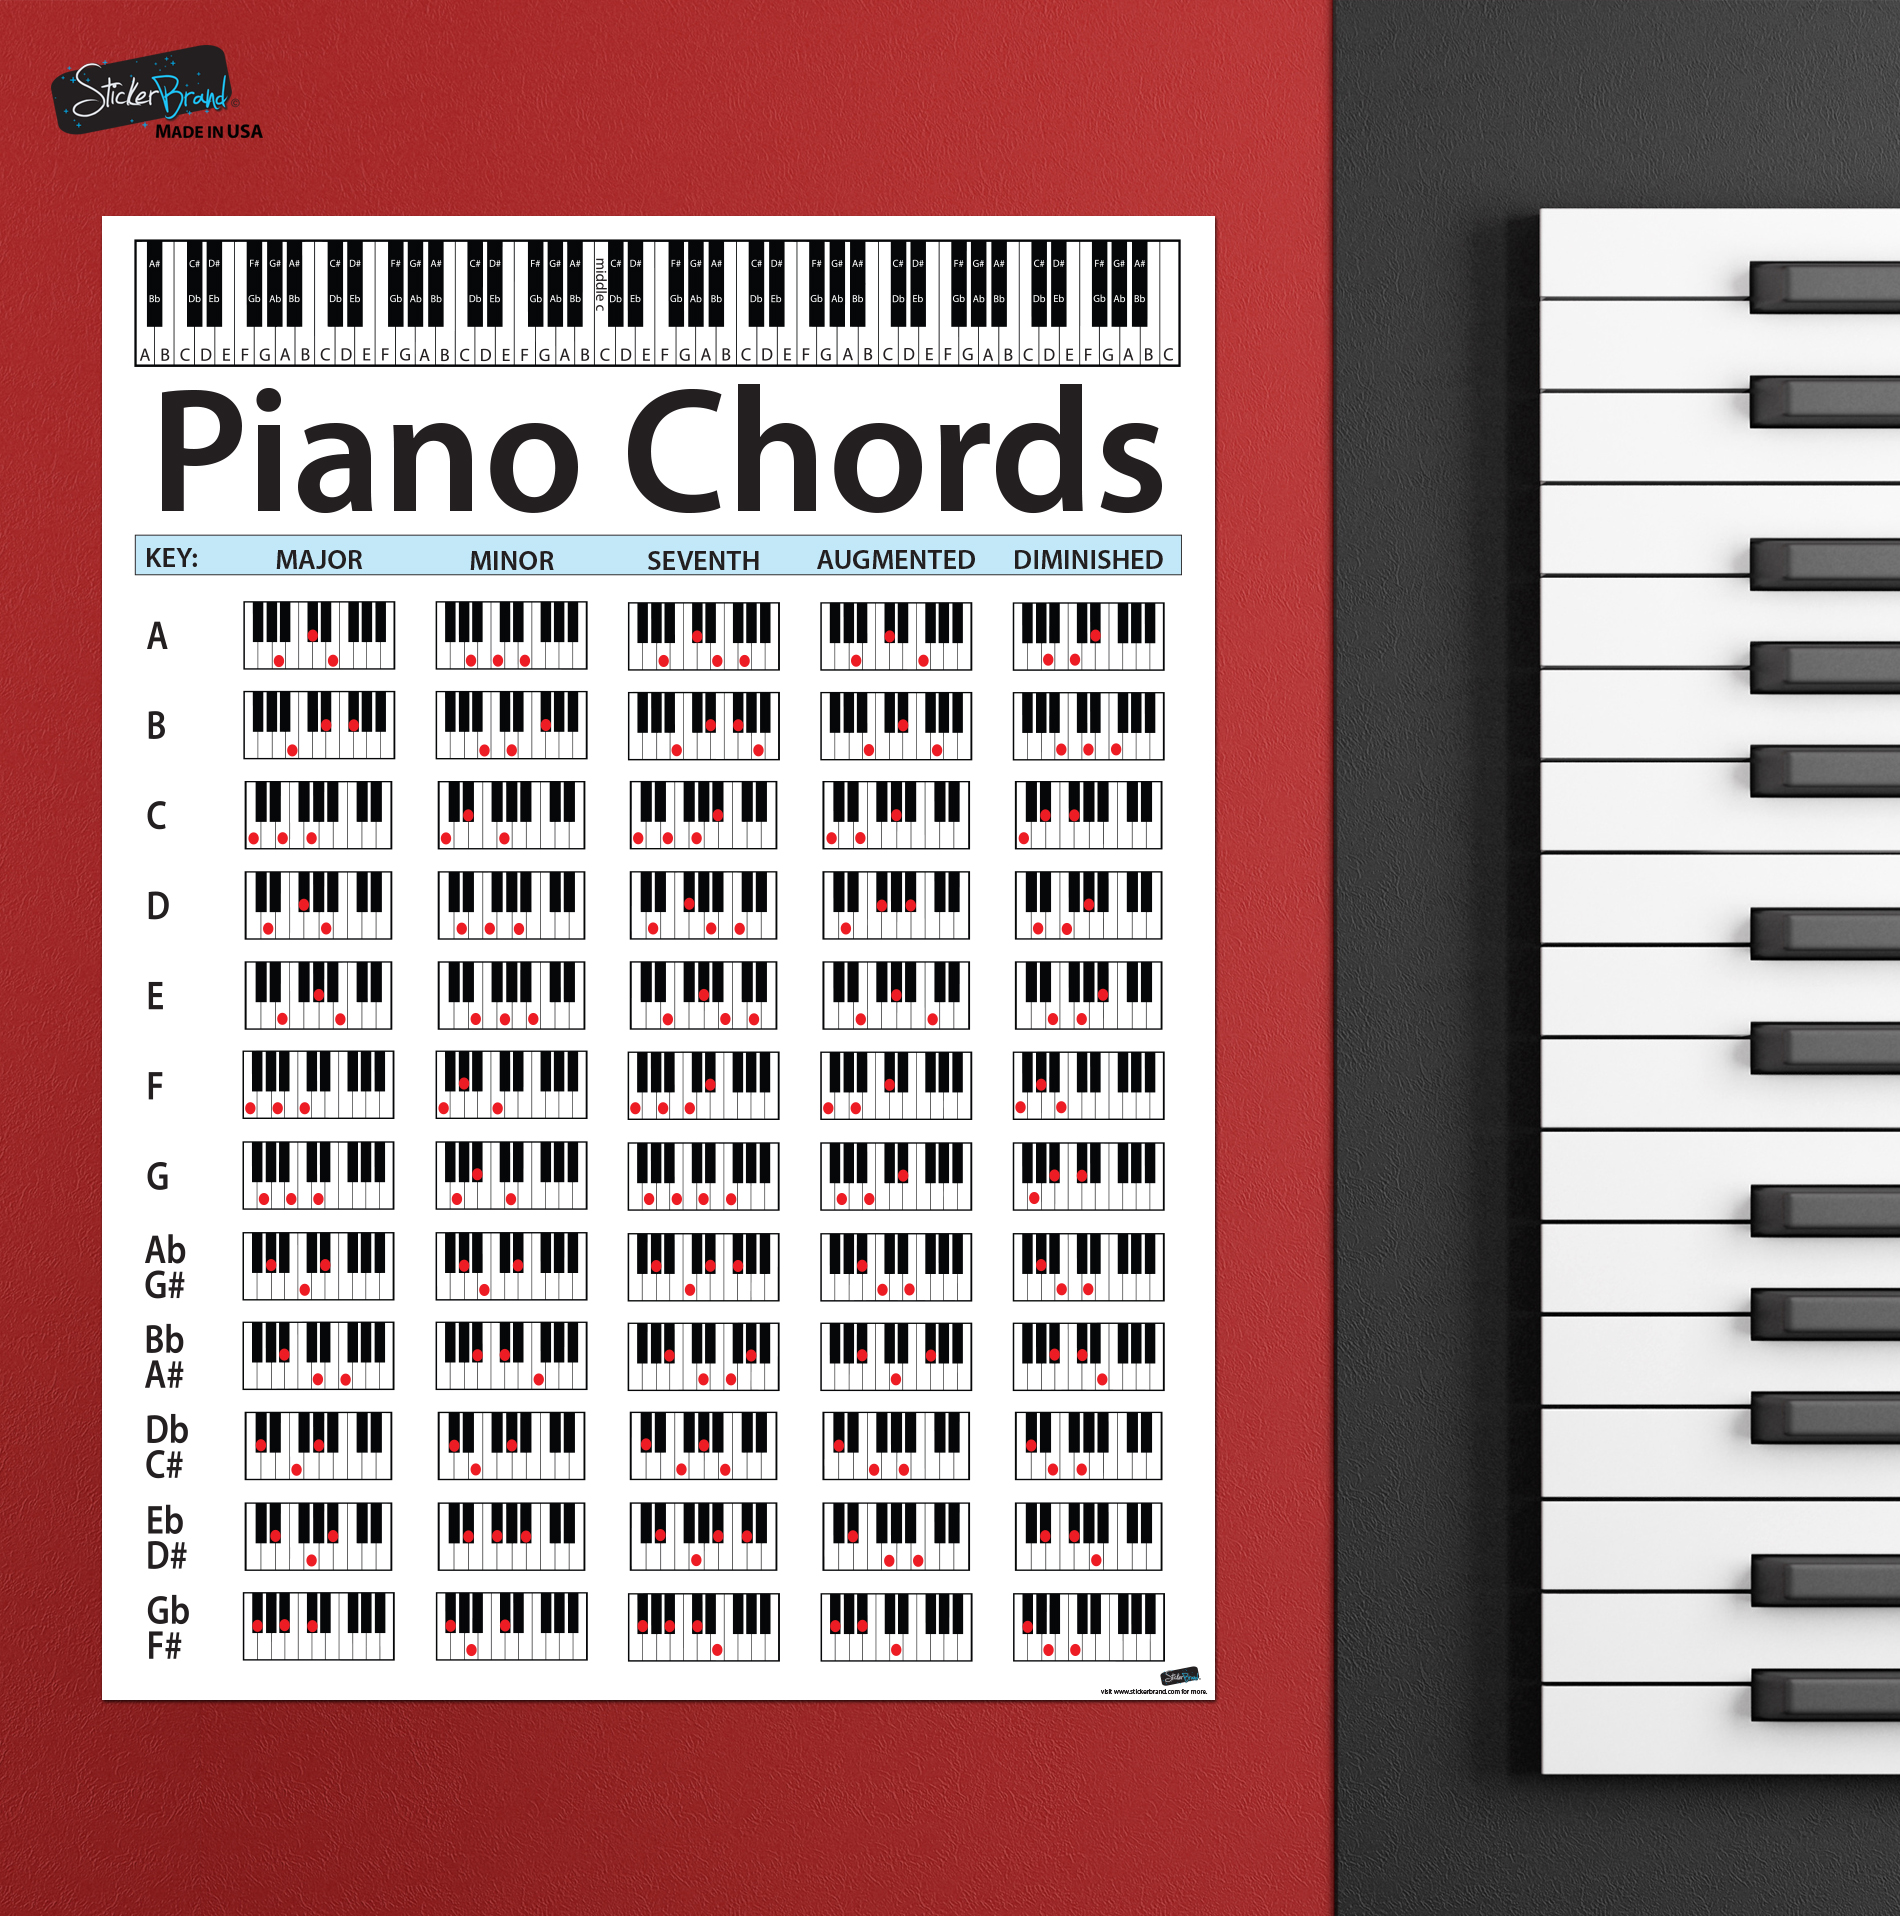 Piano Chord Chart Poster. Educational Guide for keyboard music lessons P1001 eBay